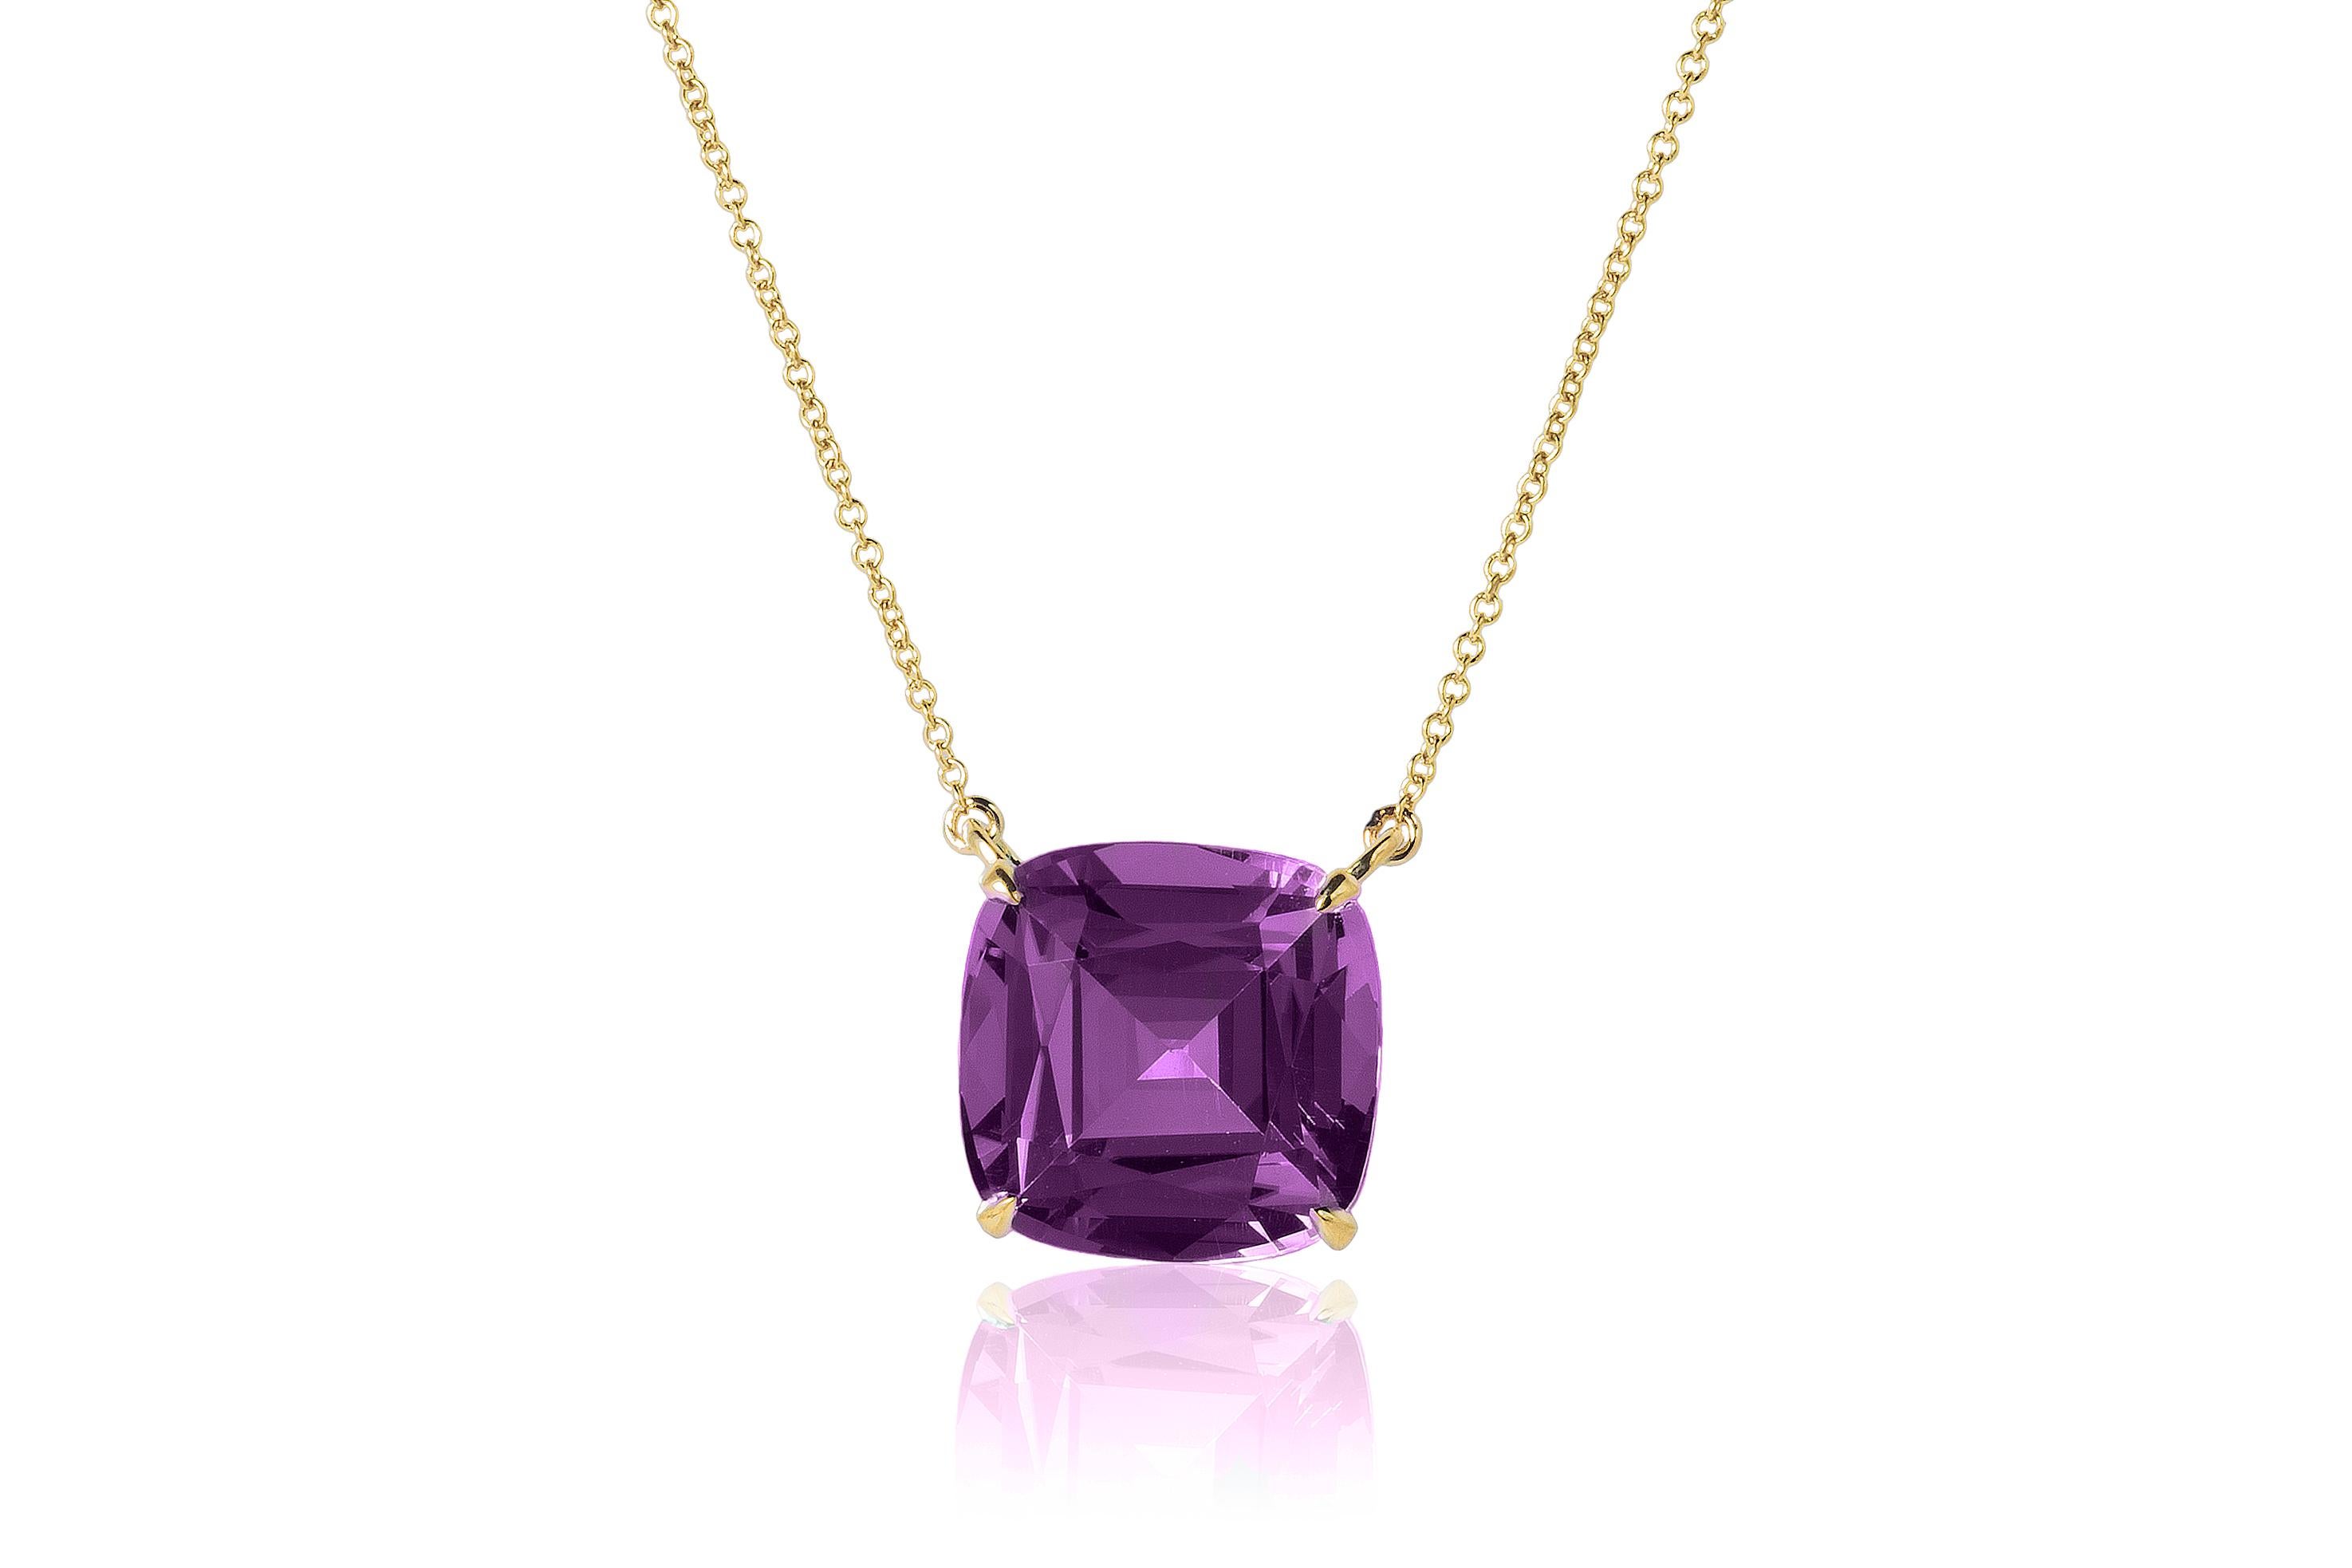 Contemporary Goshwara Amethyst Cushion Pendant on Cable Chain For Sale